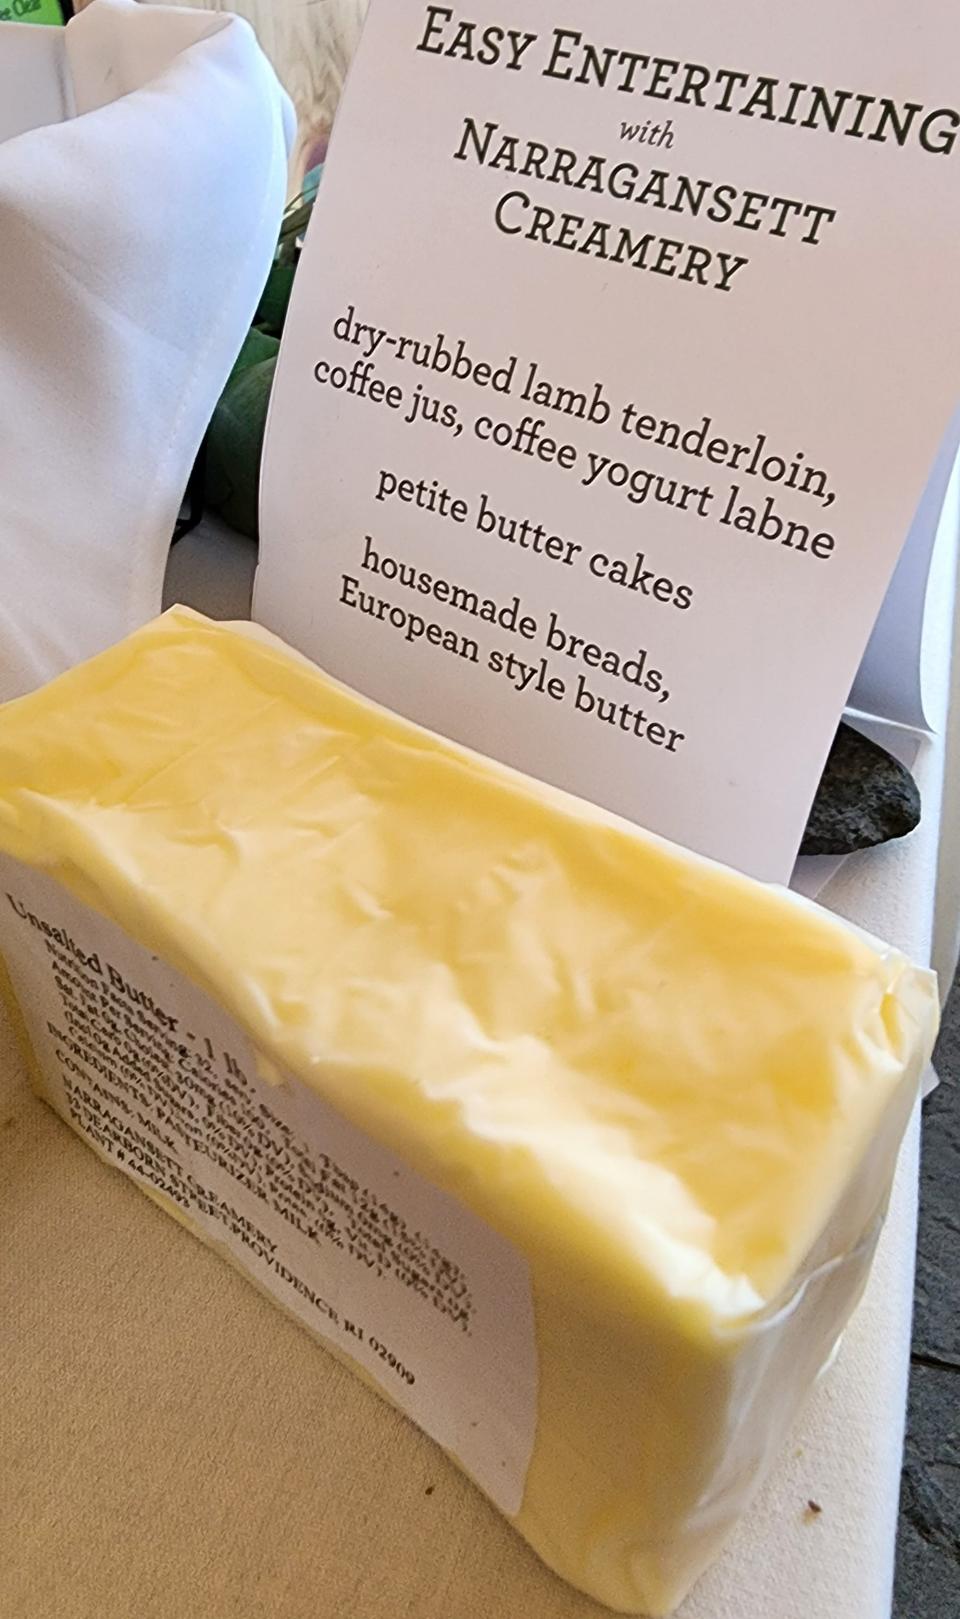 Narragansett Creamery introduced a new French butter that was used by Easy Entertaining to make Petite Butter Cakes to serve at Farm Fresh R.I.'s Local Food Fest.